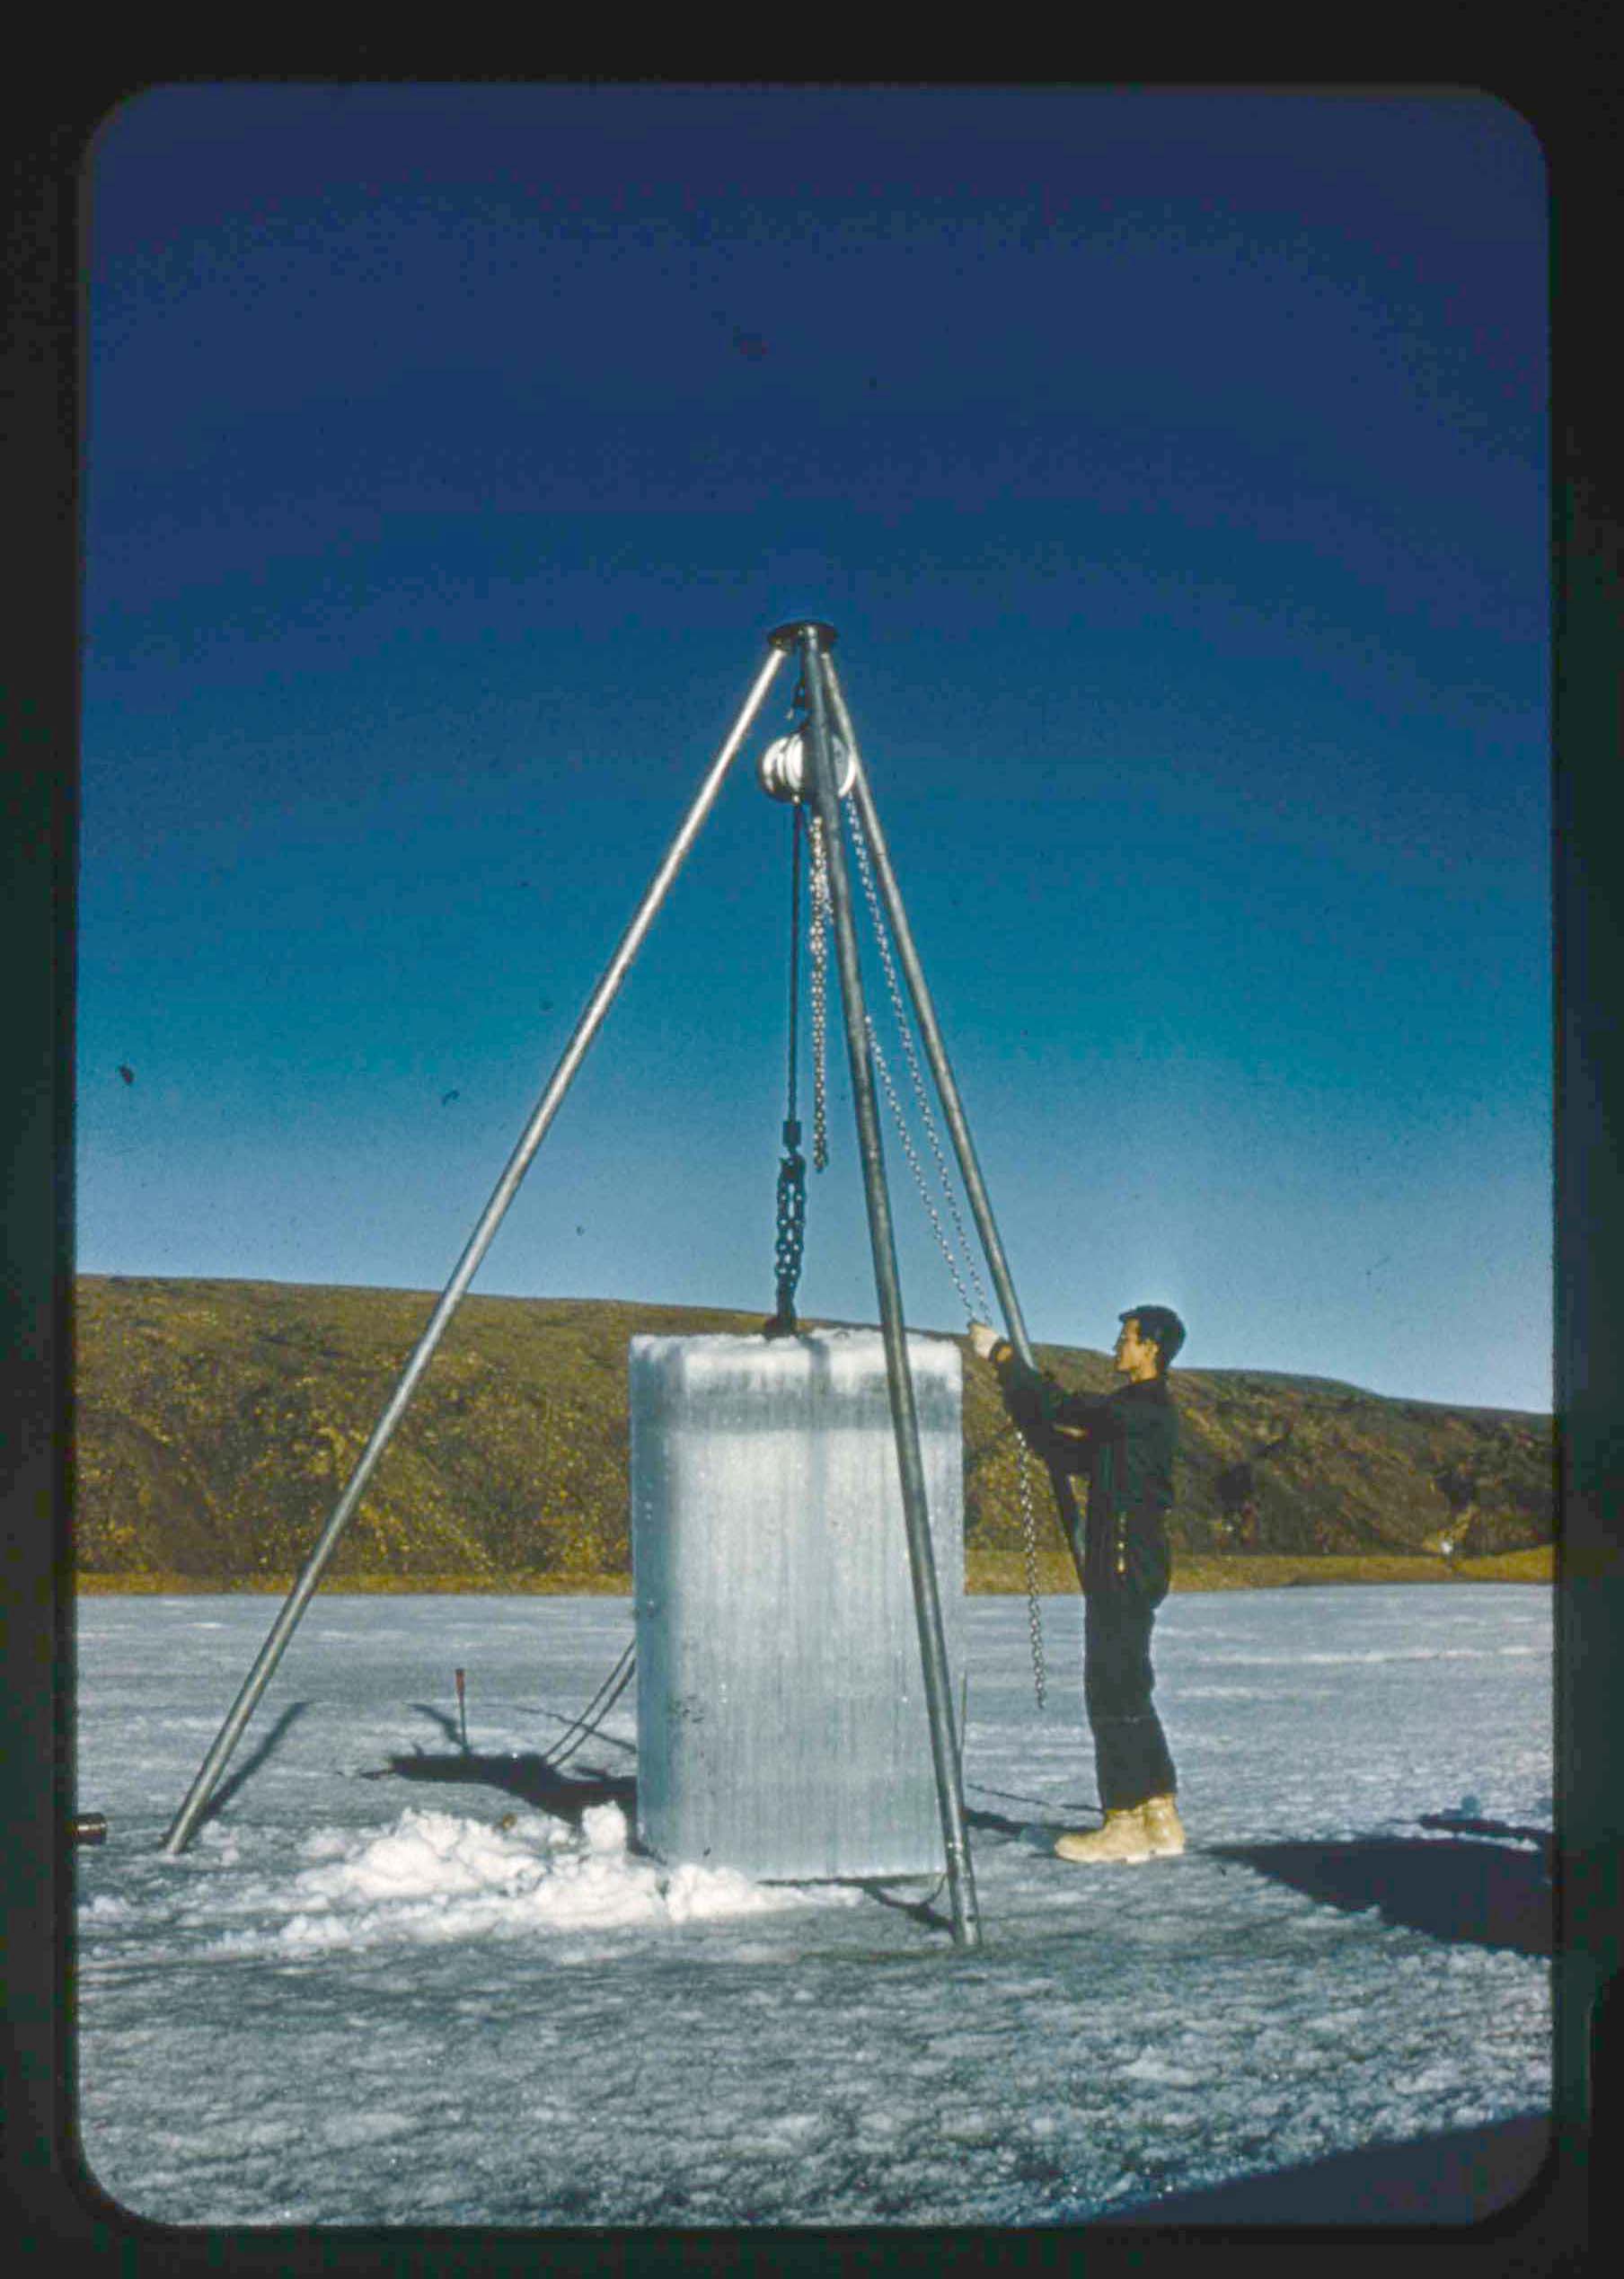 Stanley Needleman, Cabaniss Removing Block of Ice Cut from Lake for Strength Tests, Lake Peters, northwest Greenland, August 1, 1956. 35mm slide. Gift of Stanley Needleman.